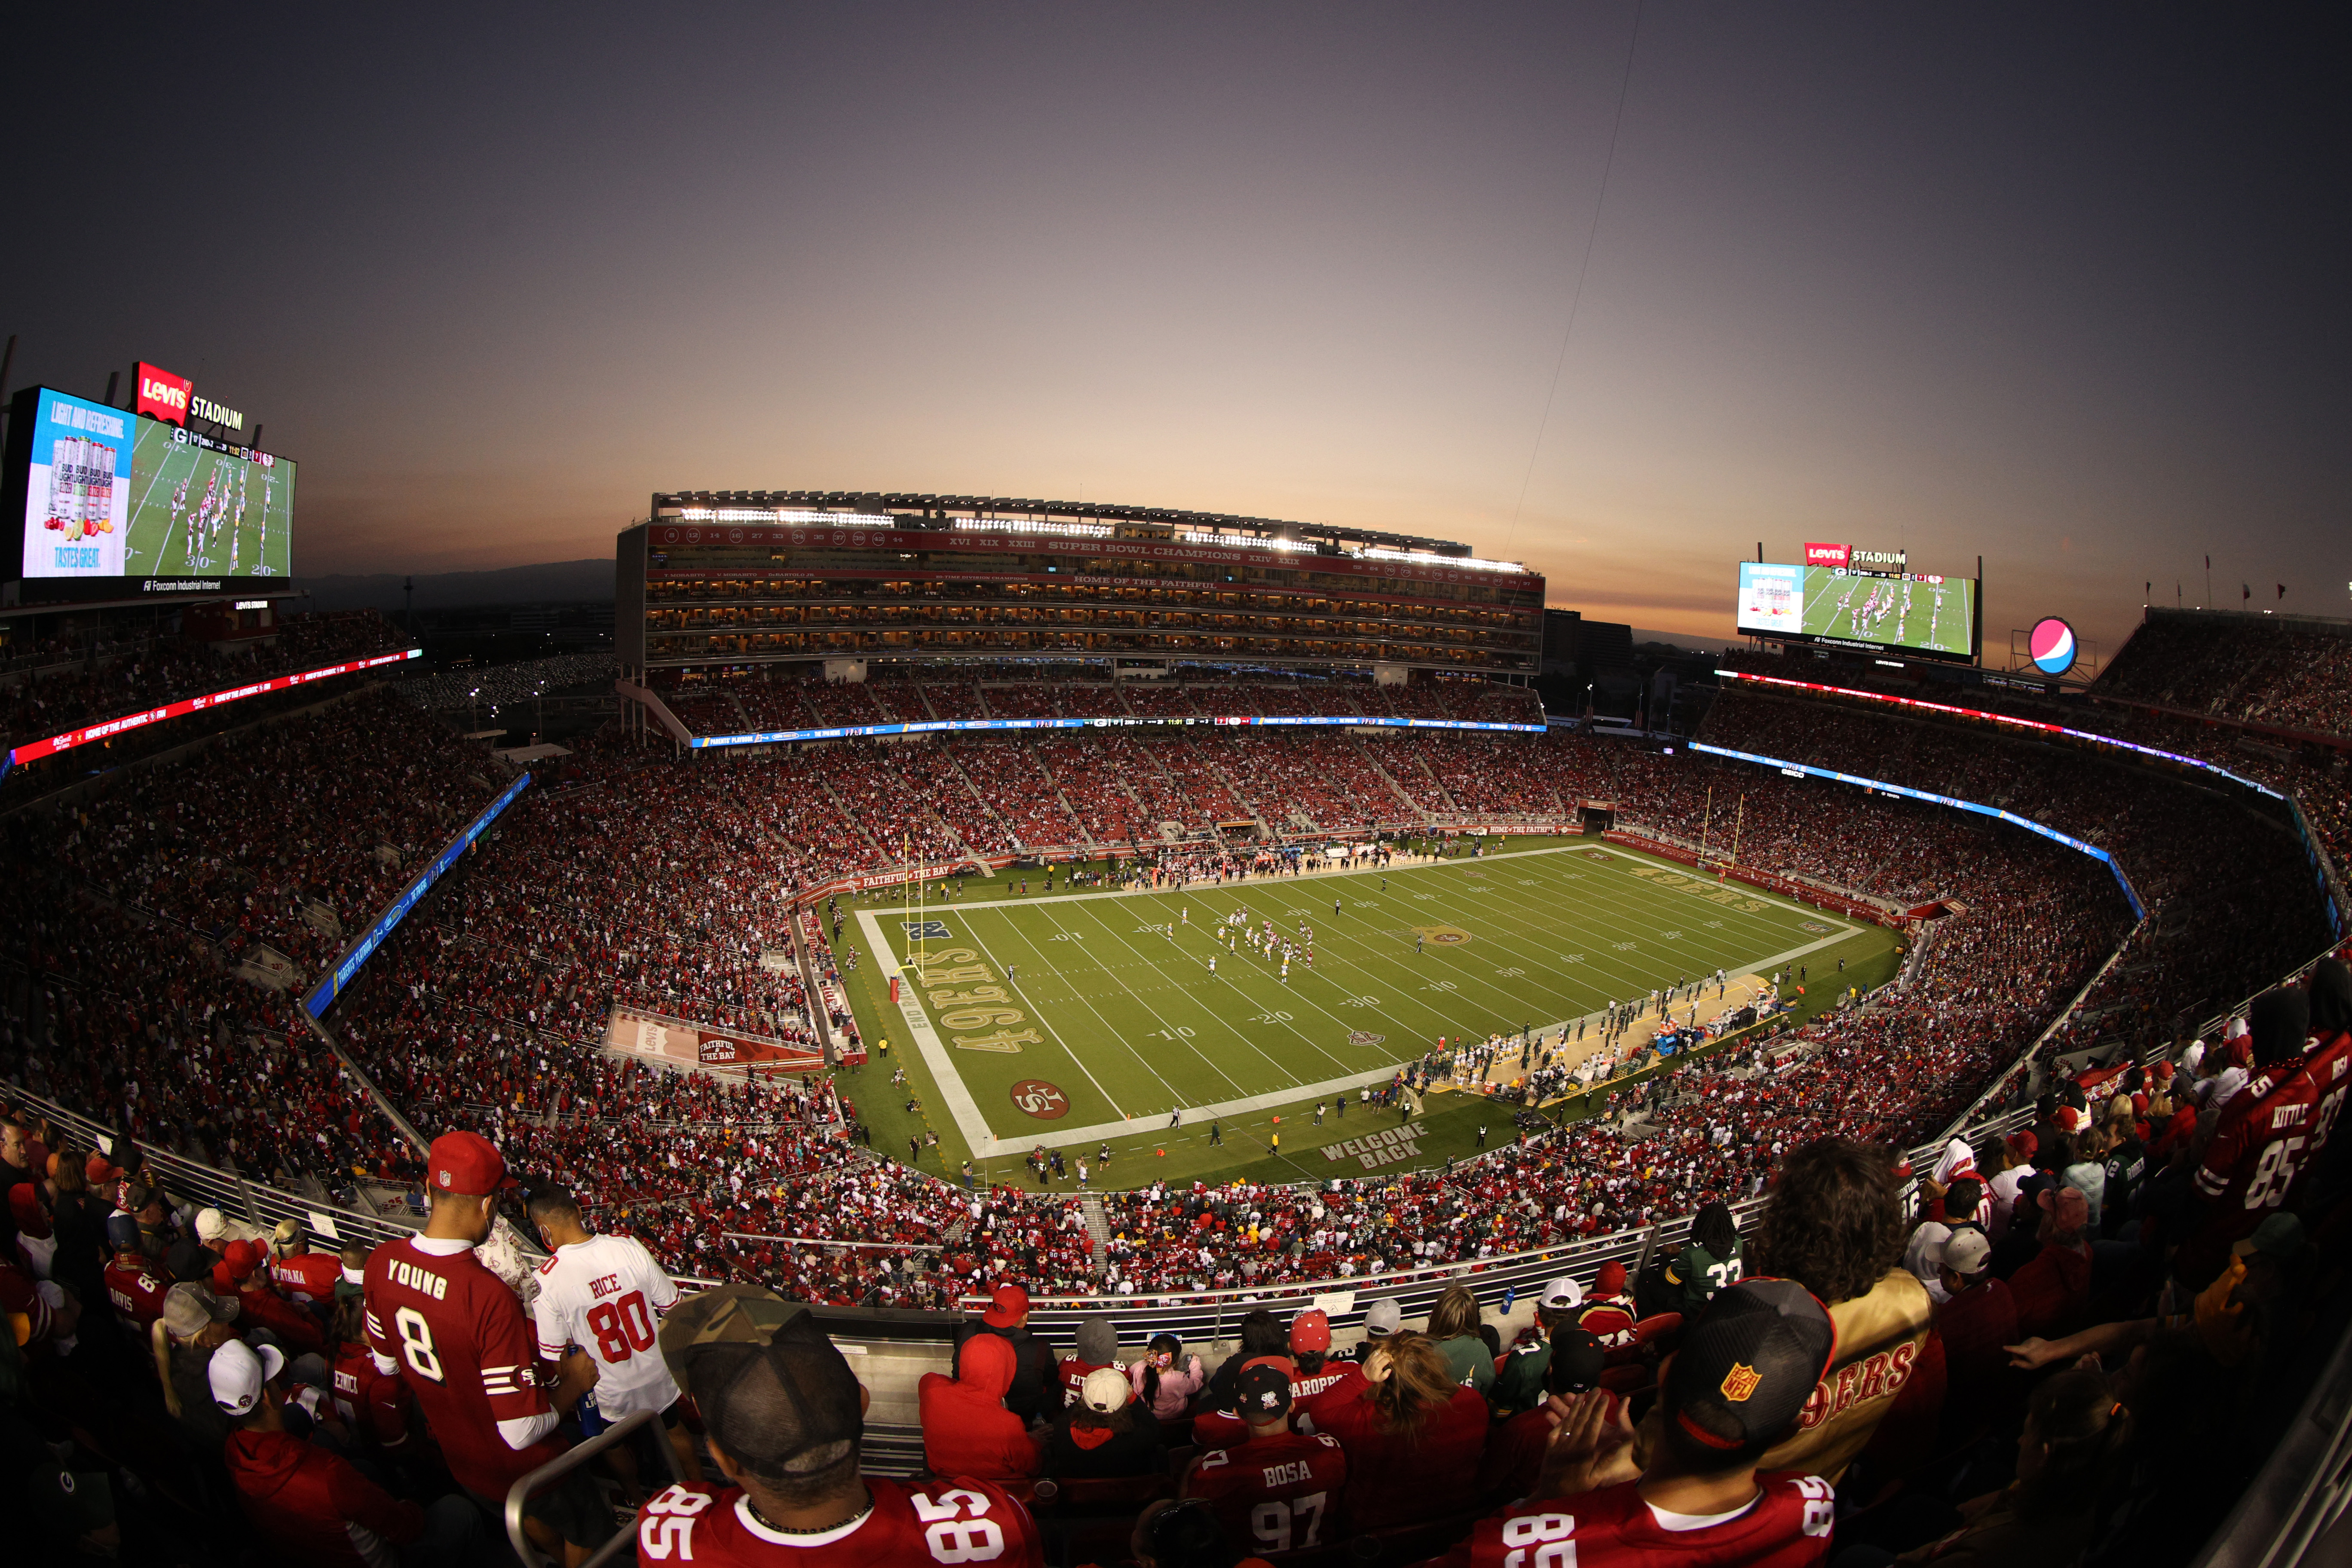 A general view of the game between the San Francisco 49ers and the Green Bay Packers at Levi’s Stadium on September 26, 2021 in Santa Clara, California.